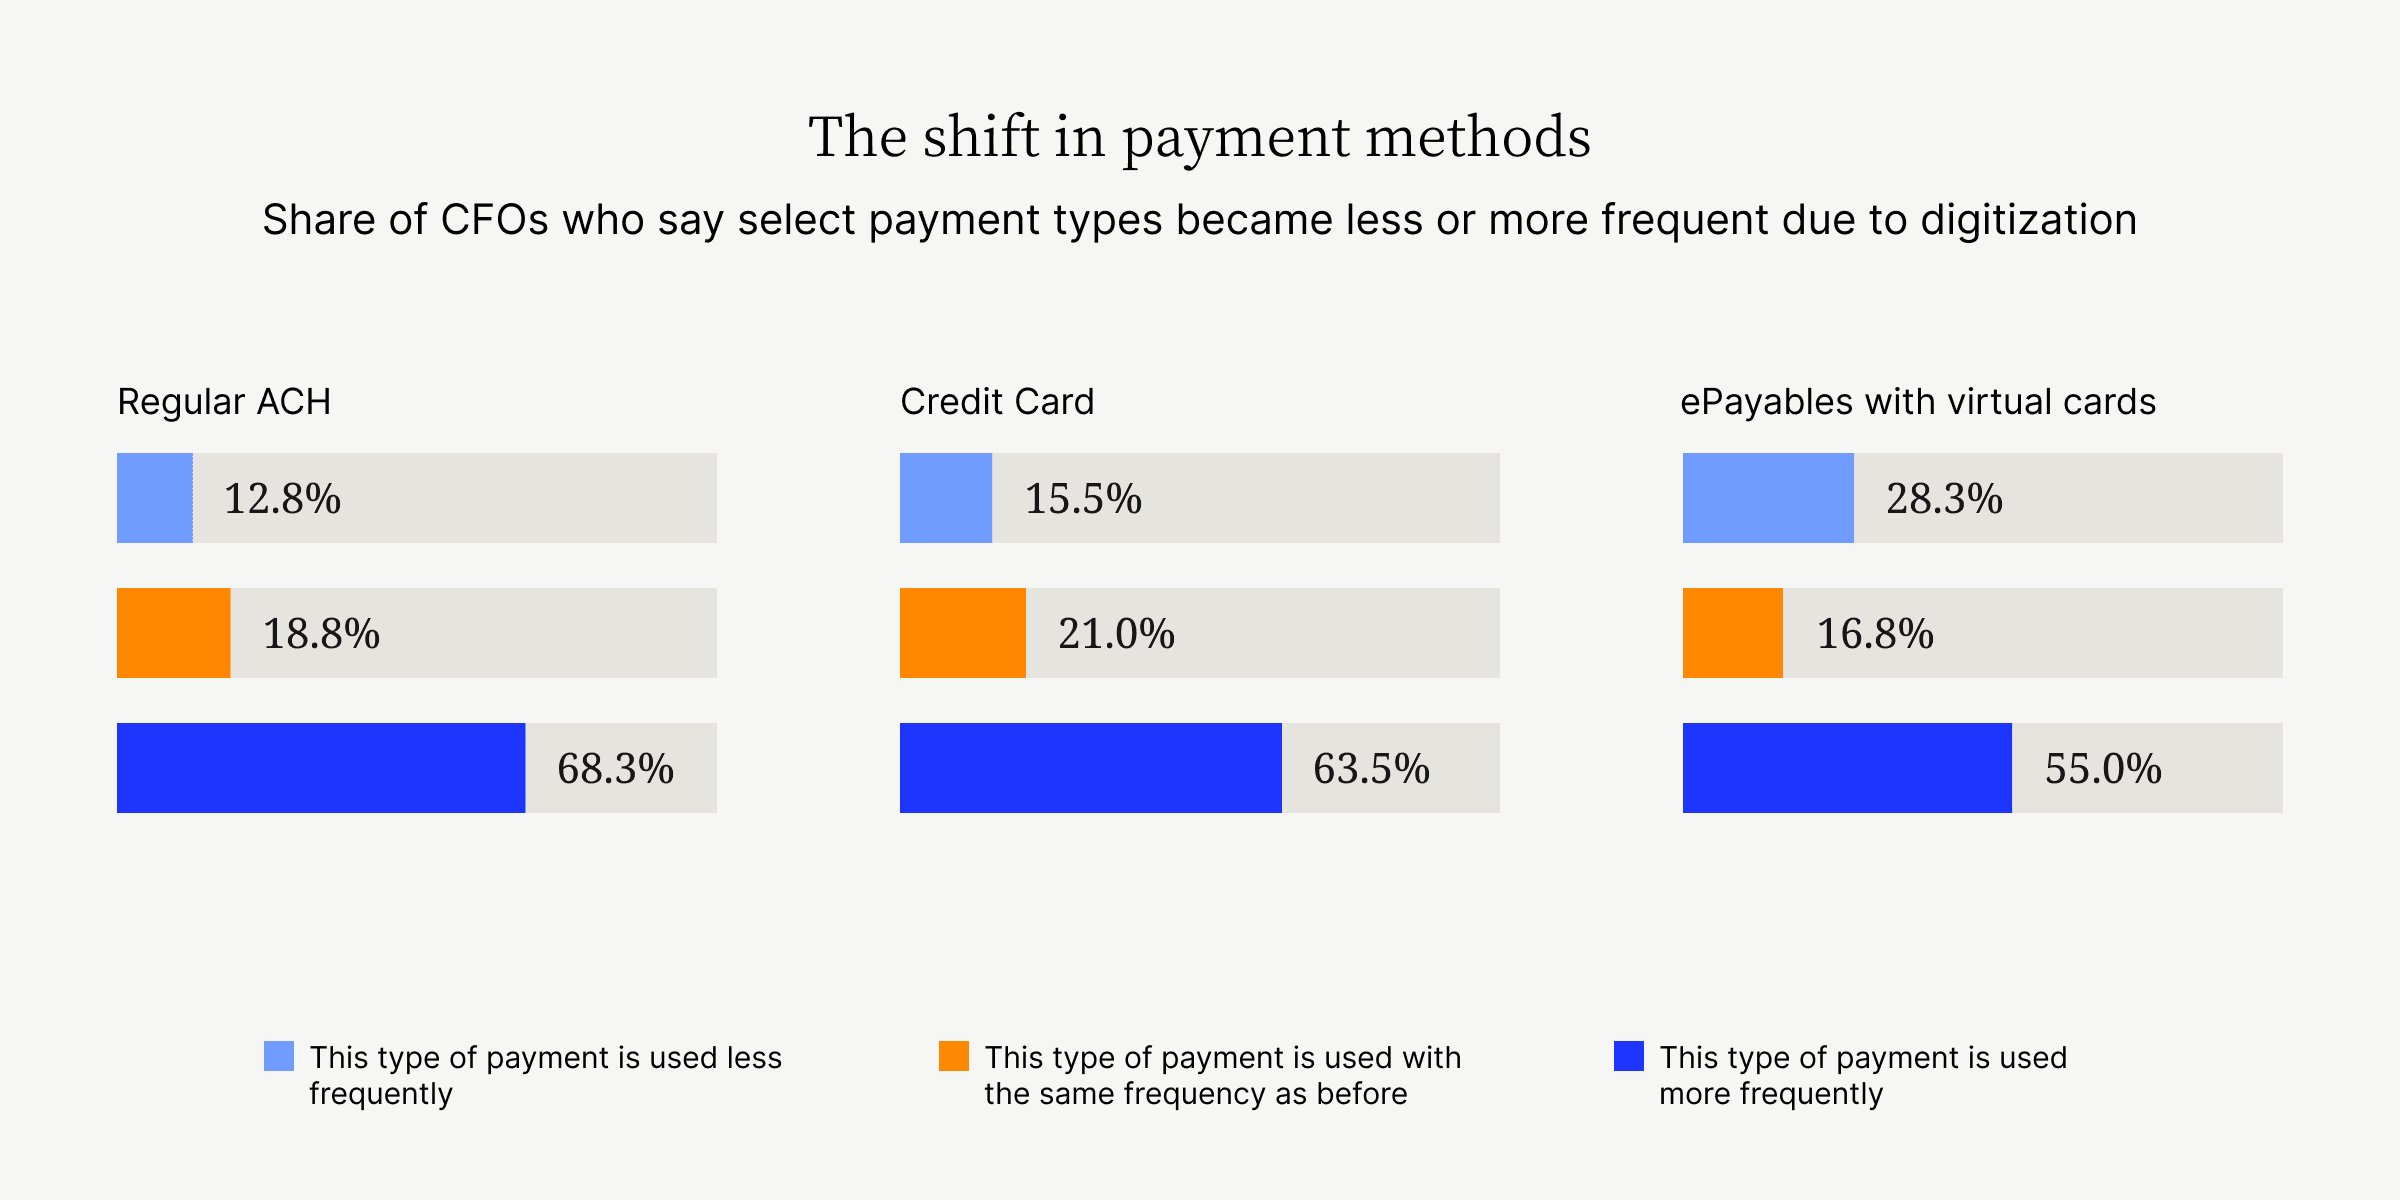 The shift in payment methods